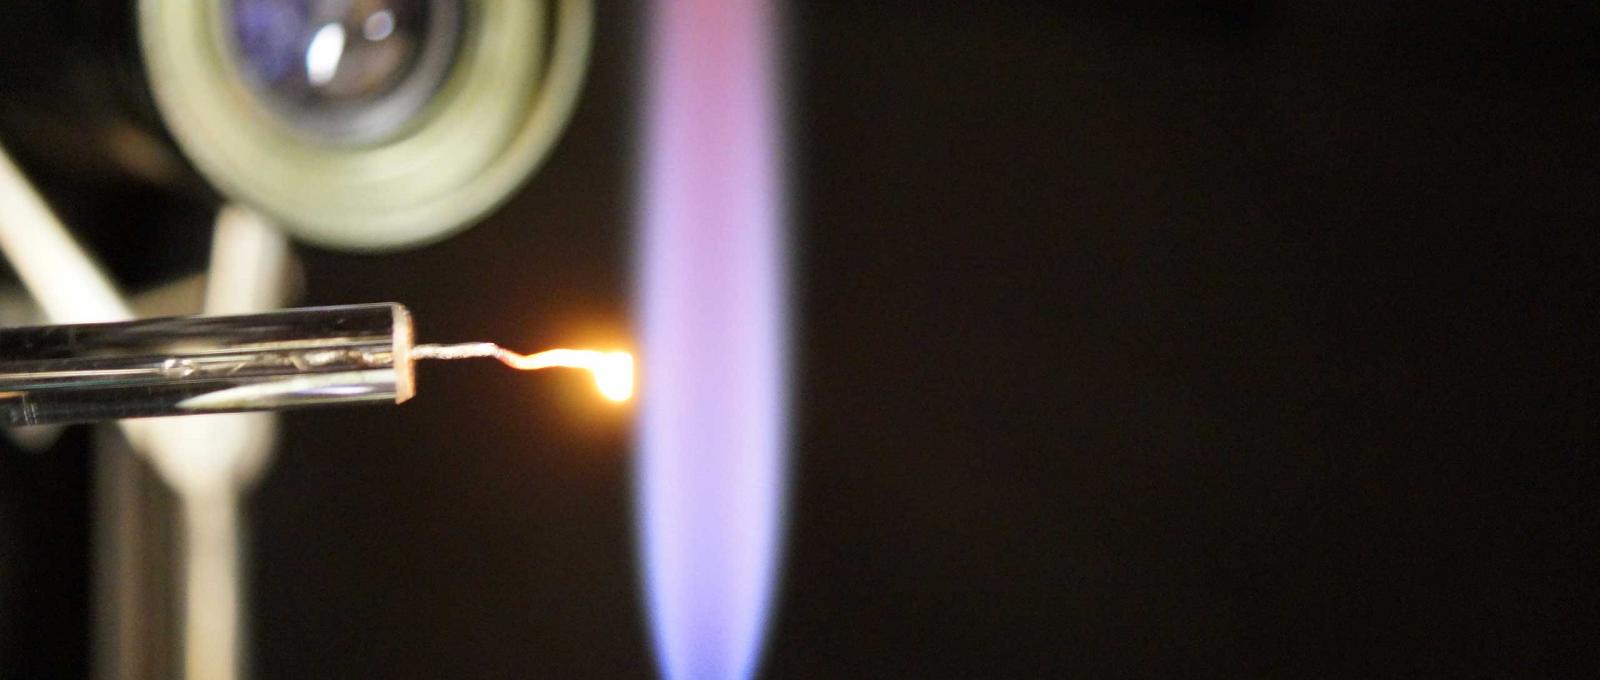 A platinum single crystal being annealed using a hydrogen flame